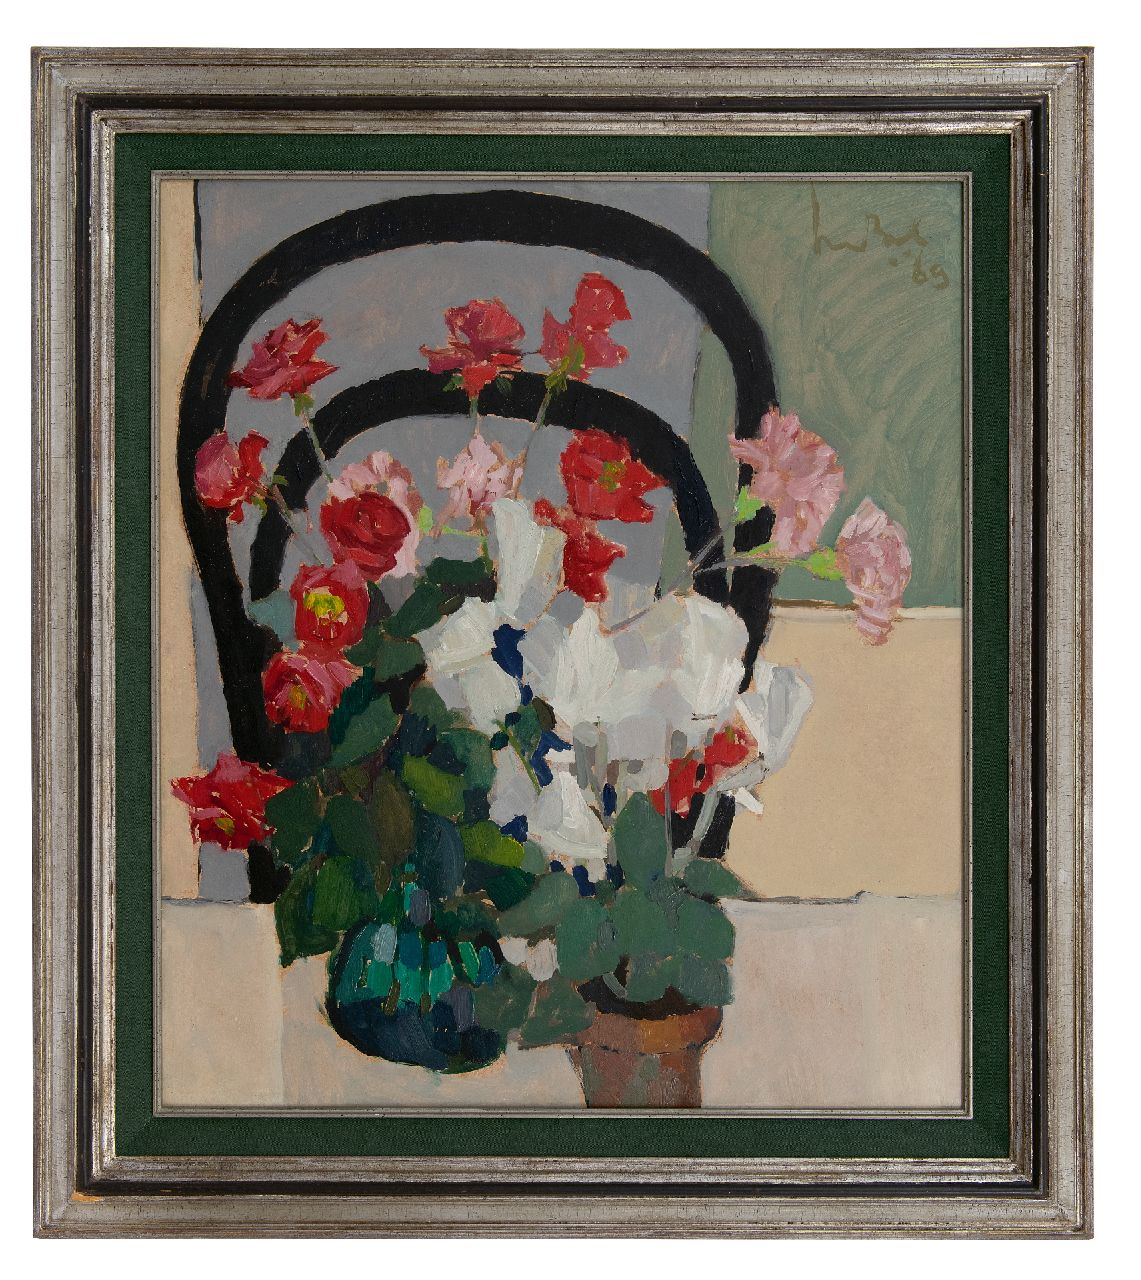 Bol K.  | Cornelis 'Kees' Bol, Roses and cyclamen, oil on board 63.0 x 55.0 cm, signed u.r. and dated '69